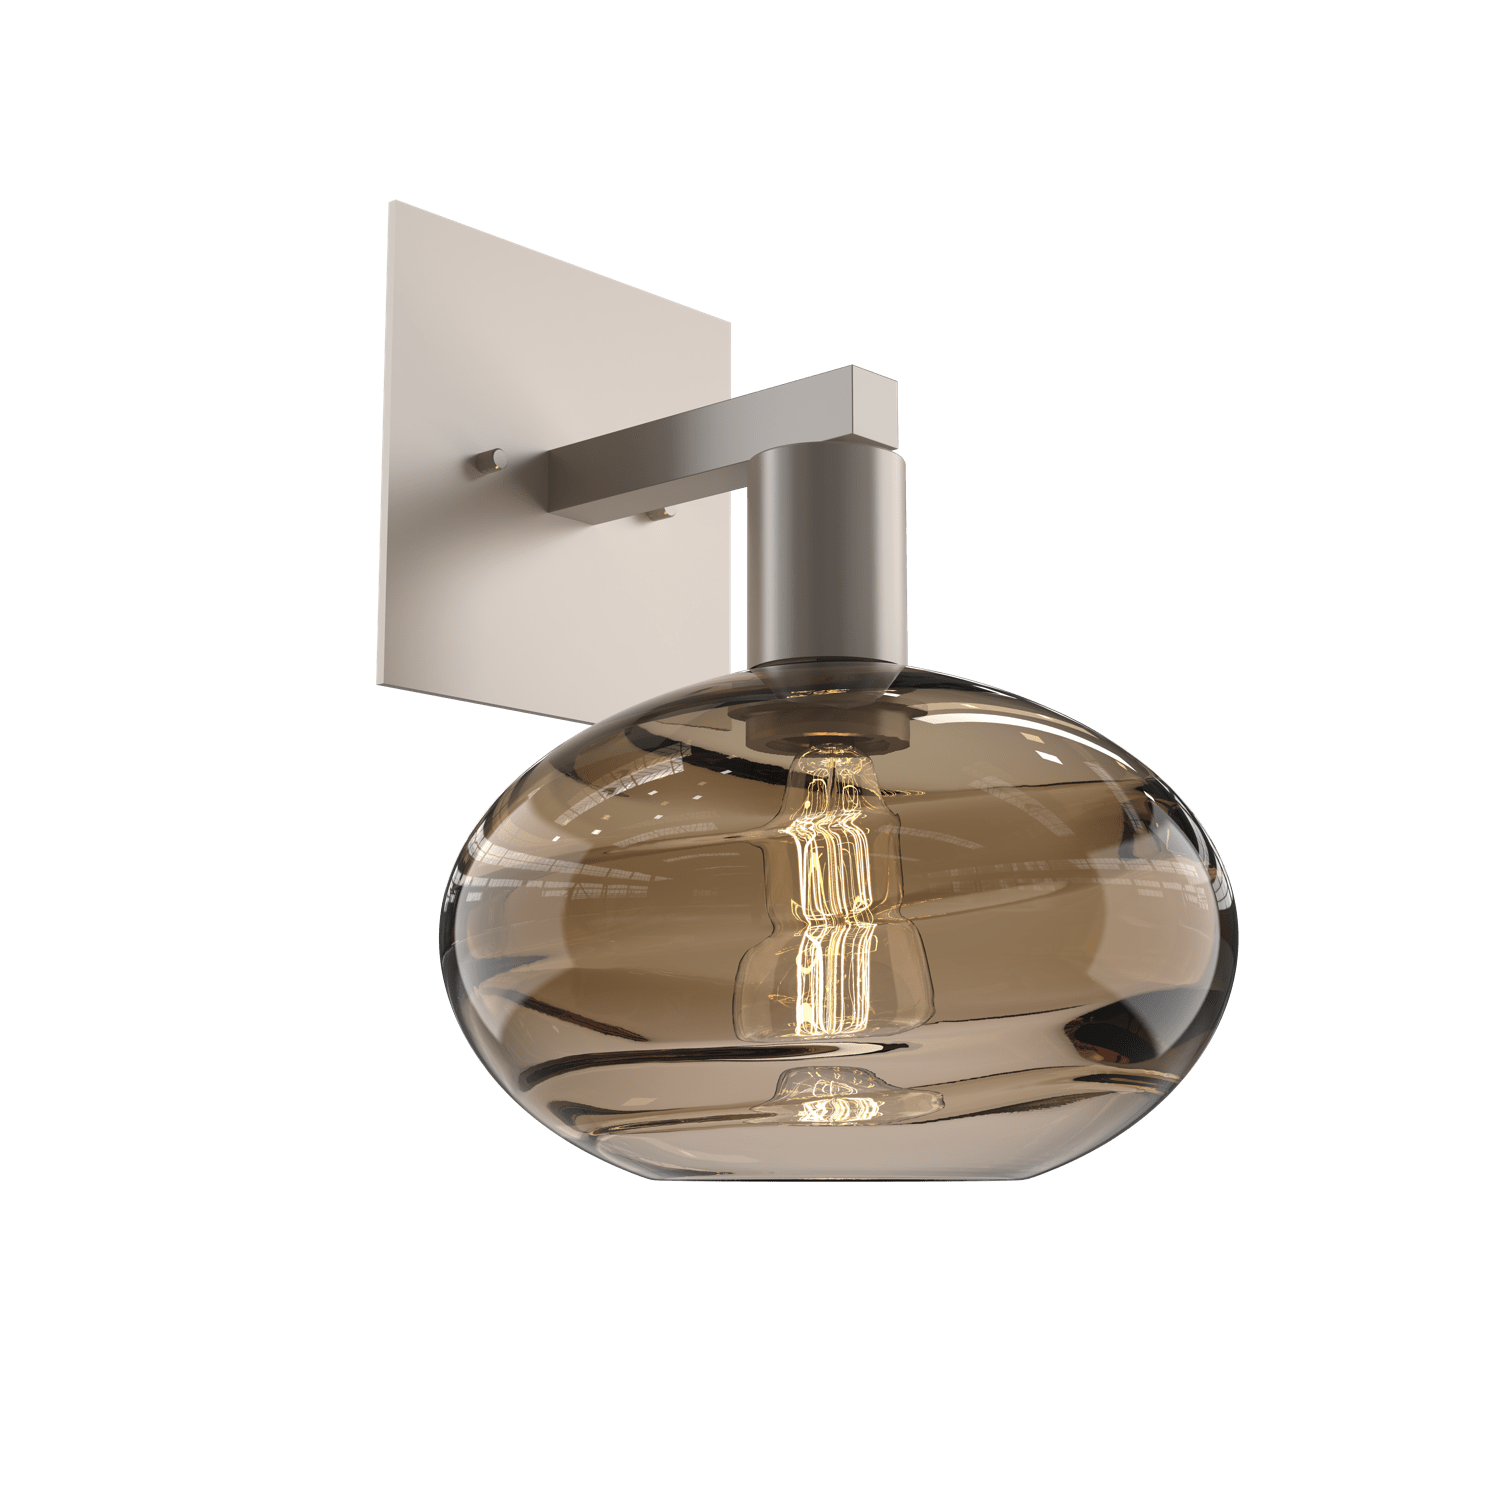 IDB0036-11-BS-OB-Hammerton-Studio-Optic-Blown-Glass-Coppa-wall-sconce-with-metallic-beige-silver-finish-and-optic-bronze-blown-glass-shades-and-incandescent-lamping